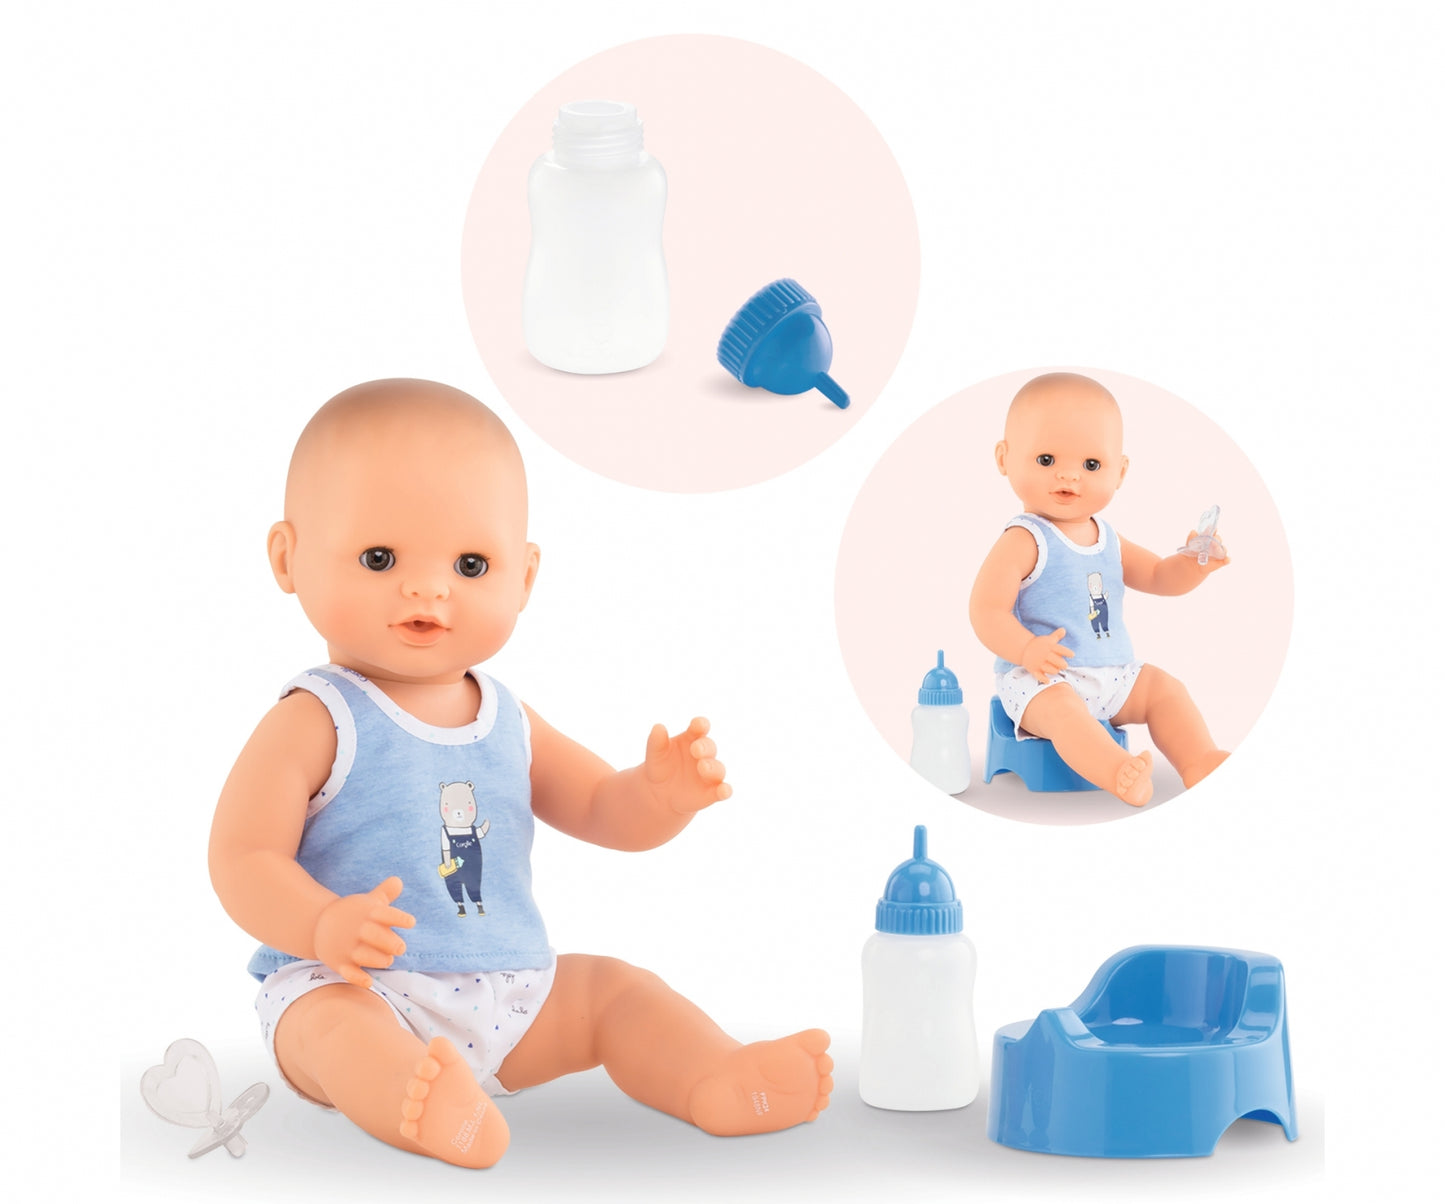 Paul Drink and Wet Bath Baby Toys Corolle   